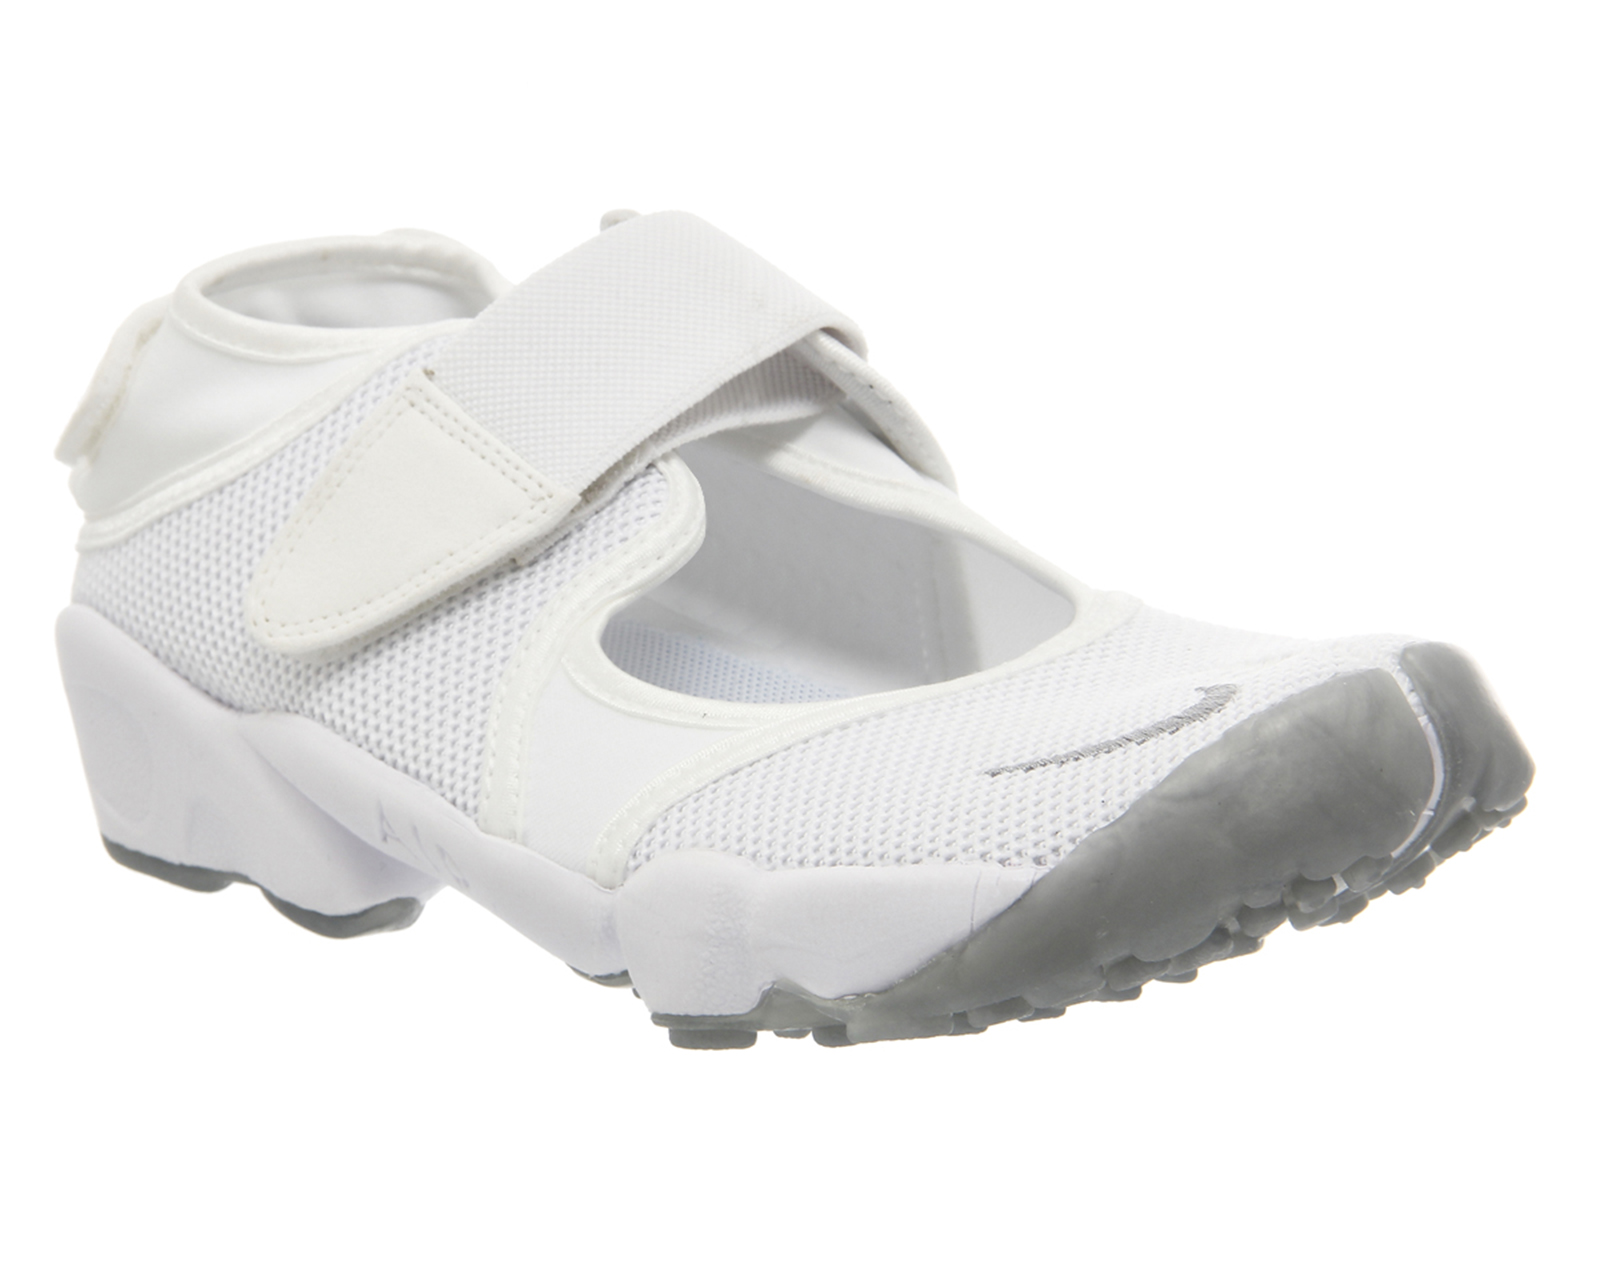 Nike Air Rift White Wolf Grey - Hers trainers